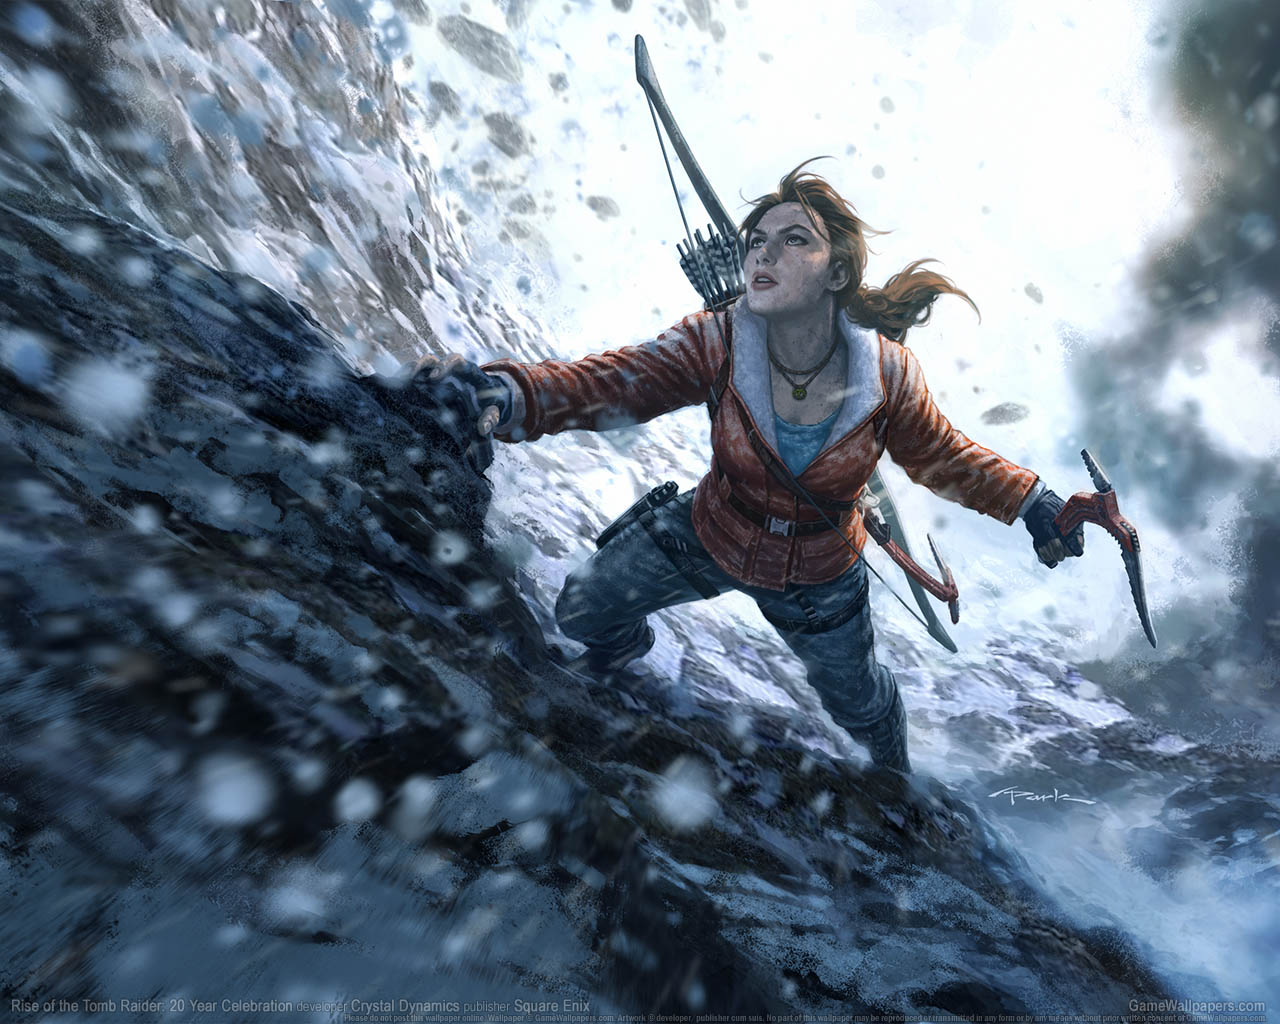 Rise of the Tomb Raider%25253A 20 Year Celebration wallpaper 02 1280x1024